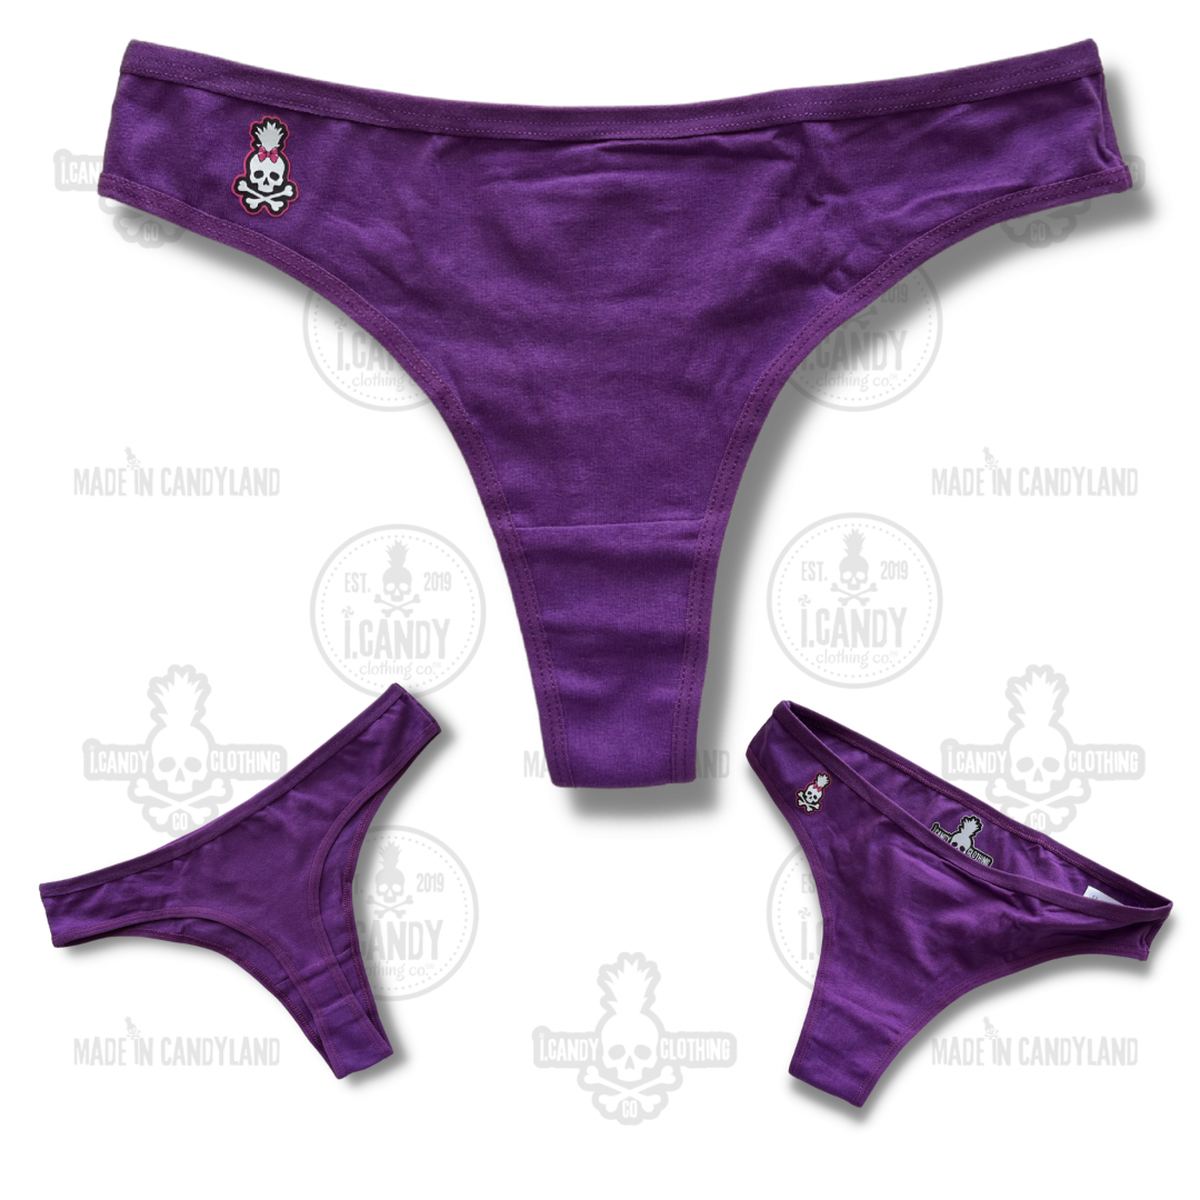 https://icandymerch.com/files/products/purple-cotton-thong-underwear.png